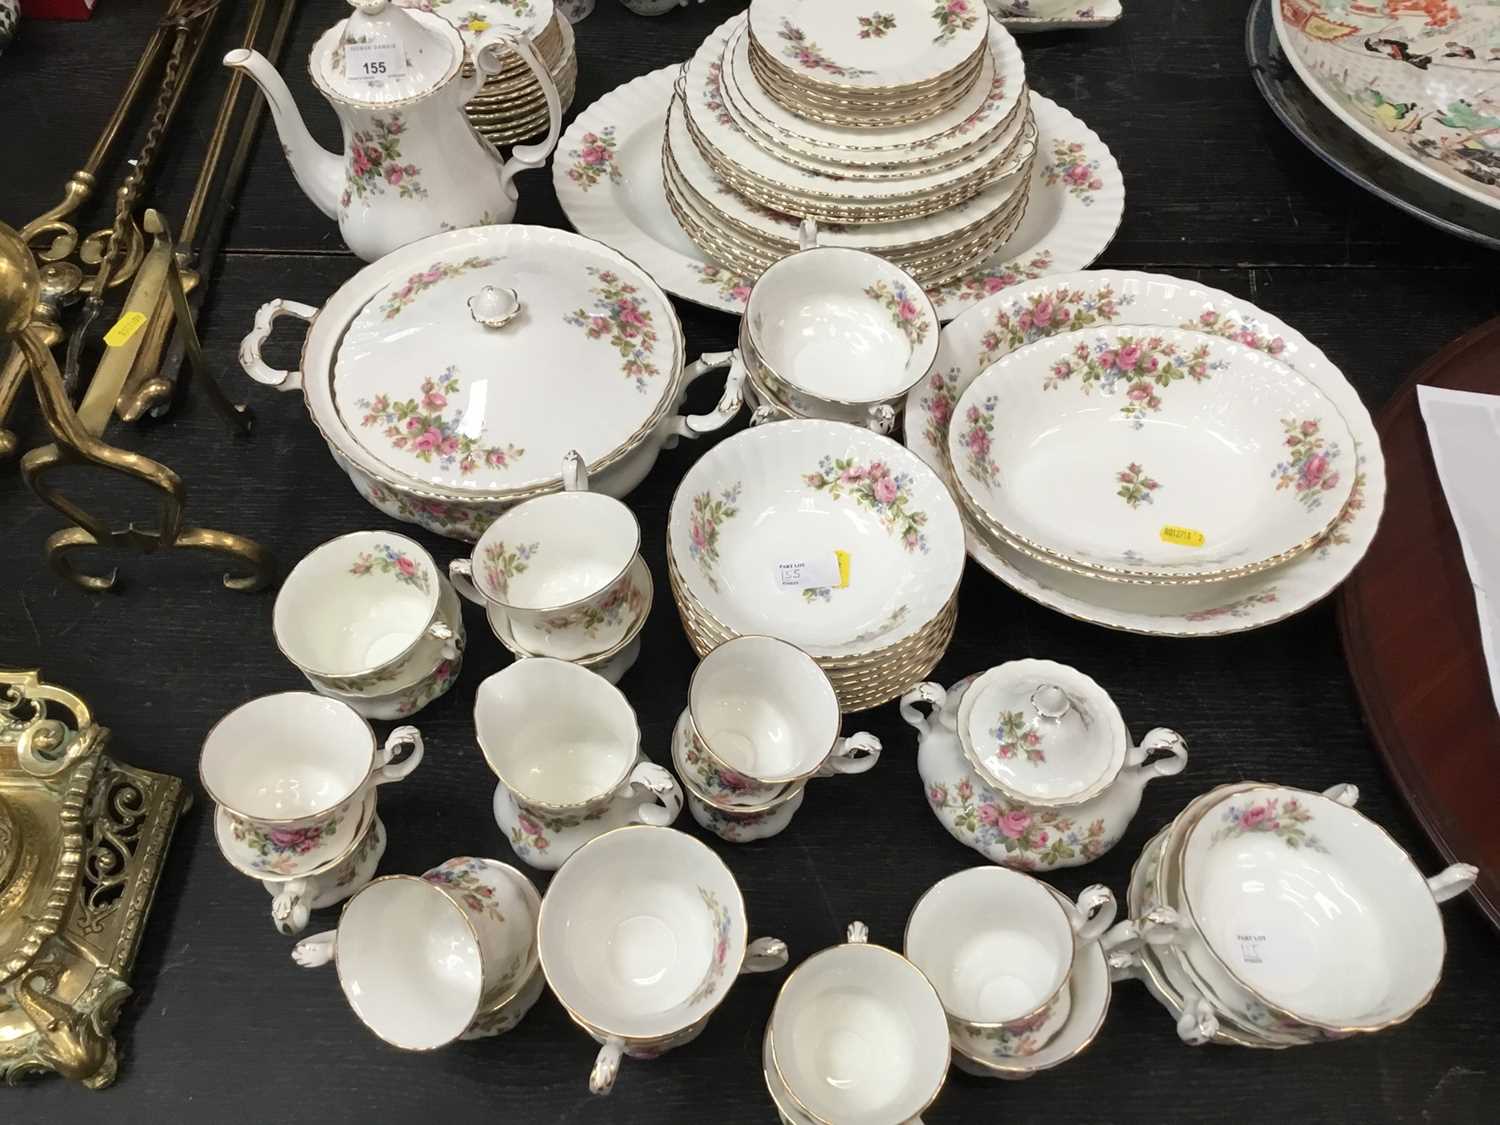 Royal Albert Moss Rose pattern tea and dinner service (approximately 57 pieces).